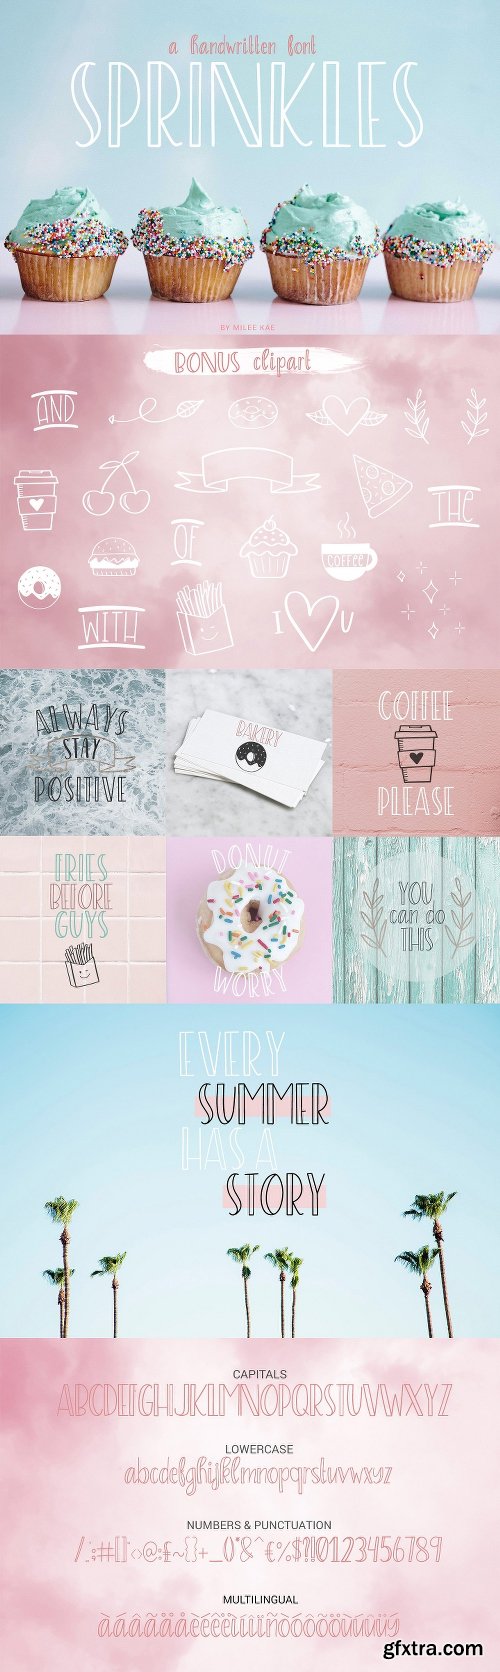 CreativeMarket Sprinkles A Sweet And Playful Font! 2382609